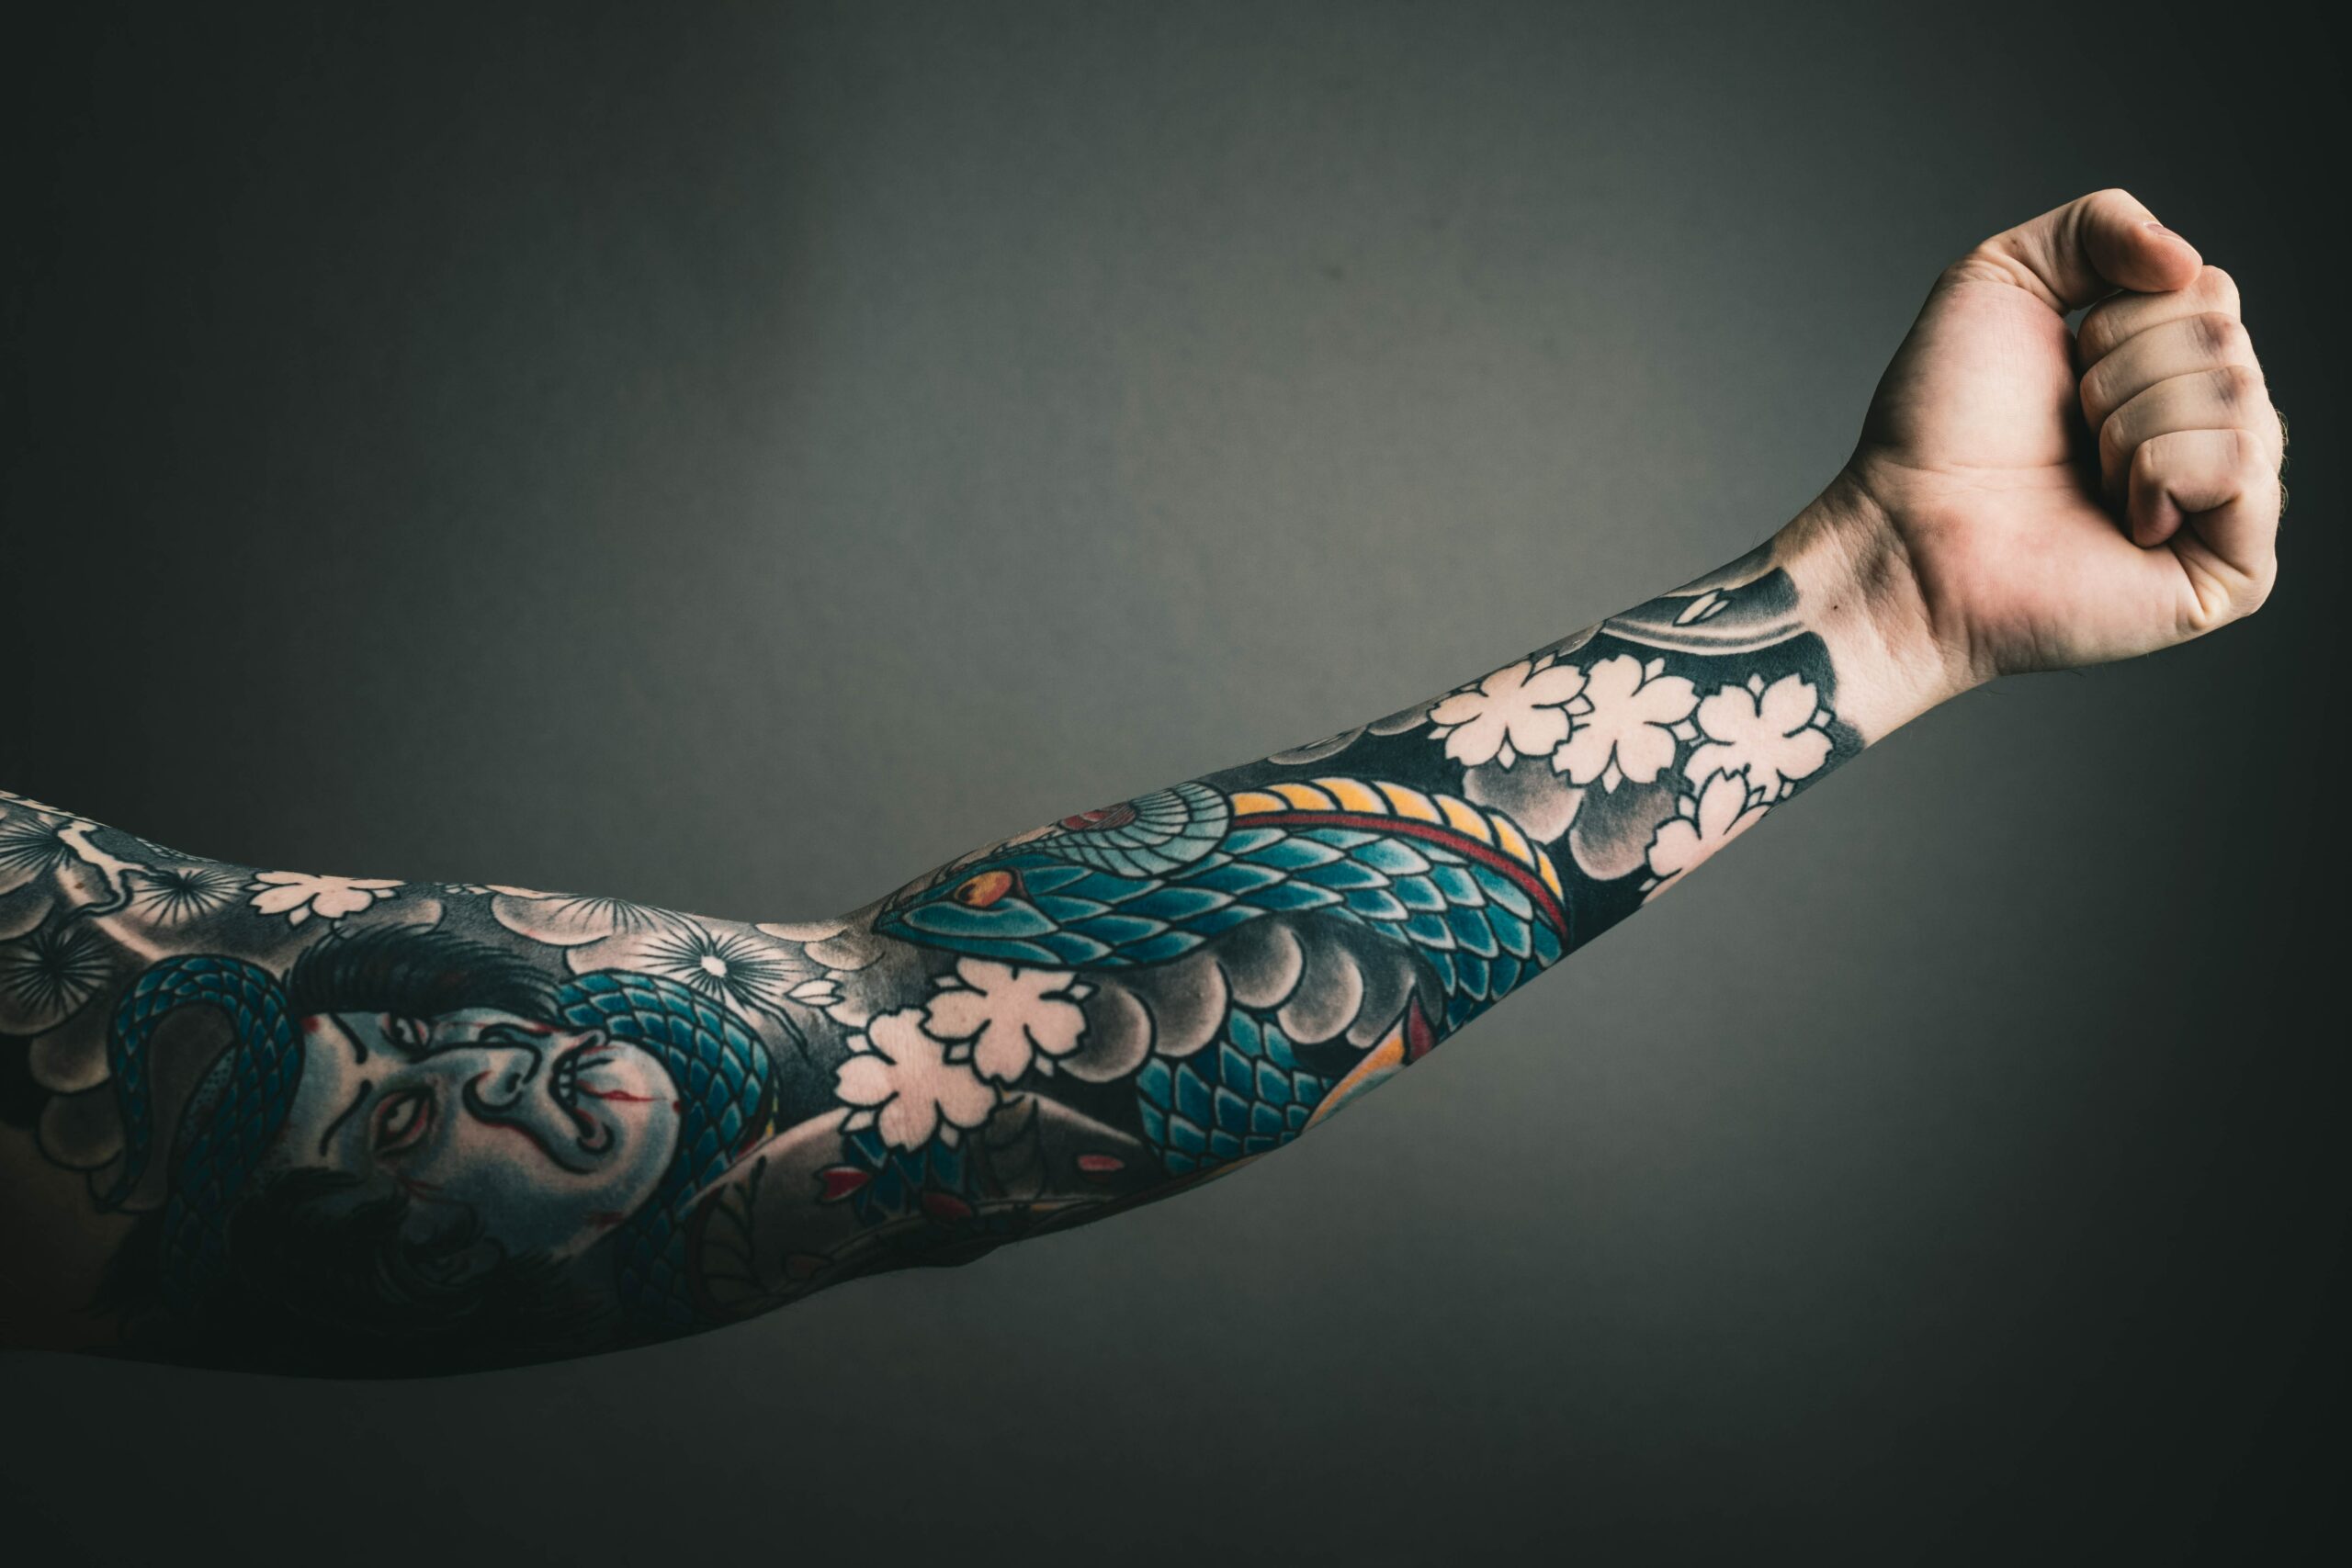 See how tattoo art has changed since the 18th century | CNN